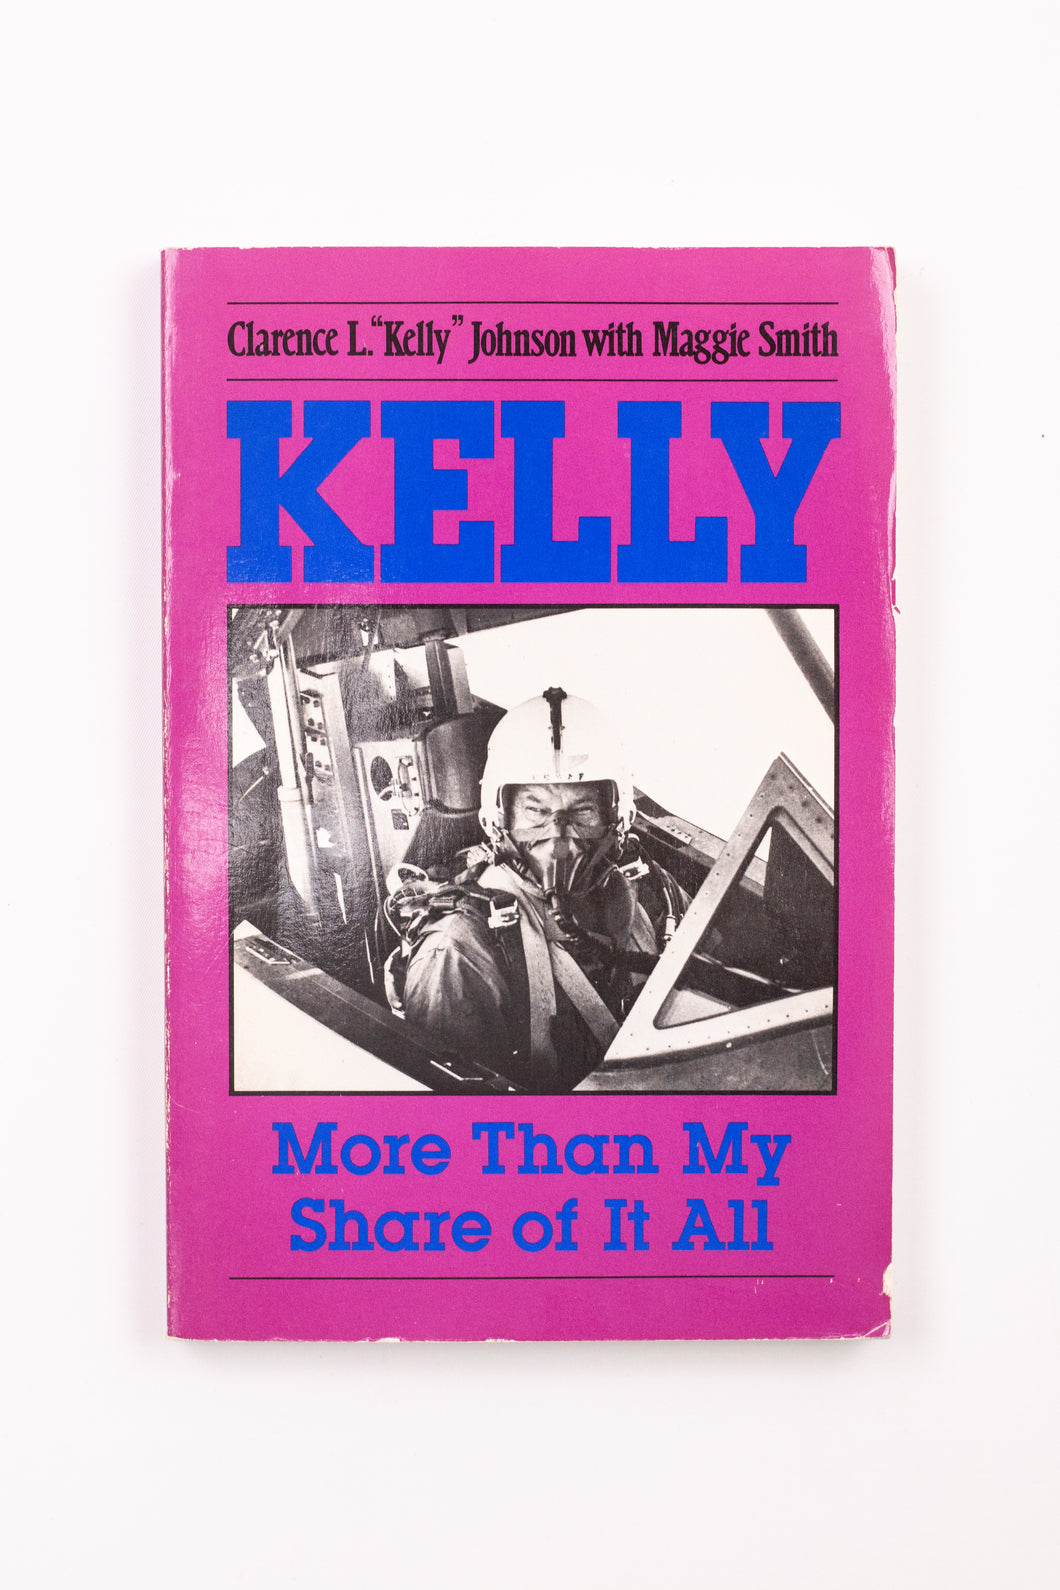 KELLY: MORE THAN MY SHARE OF IT ALL BOOK